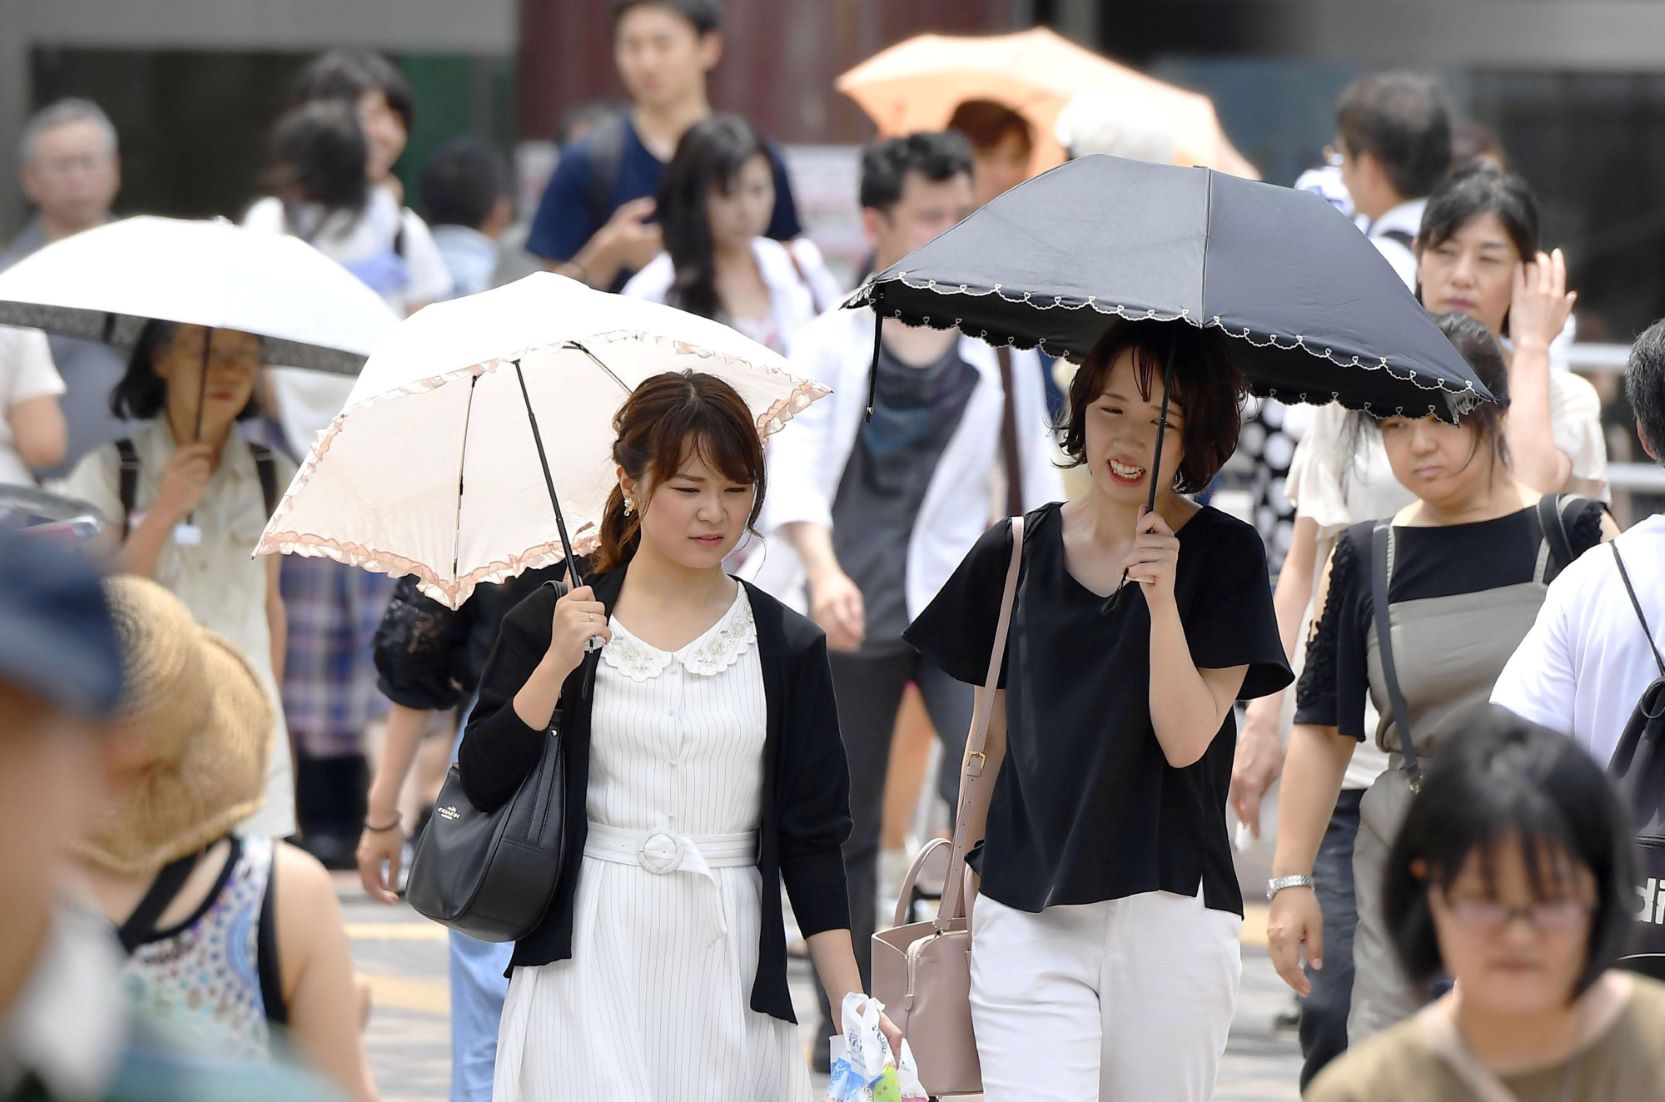 Heatwave Hits Parts Of Japan: Weather Agency